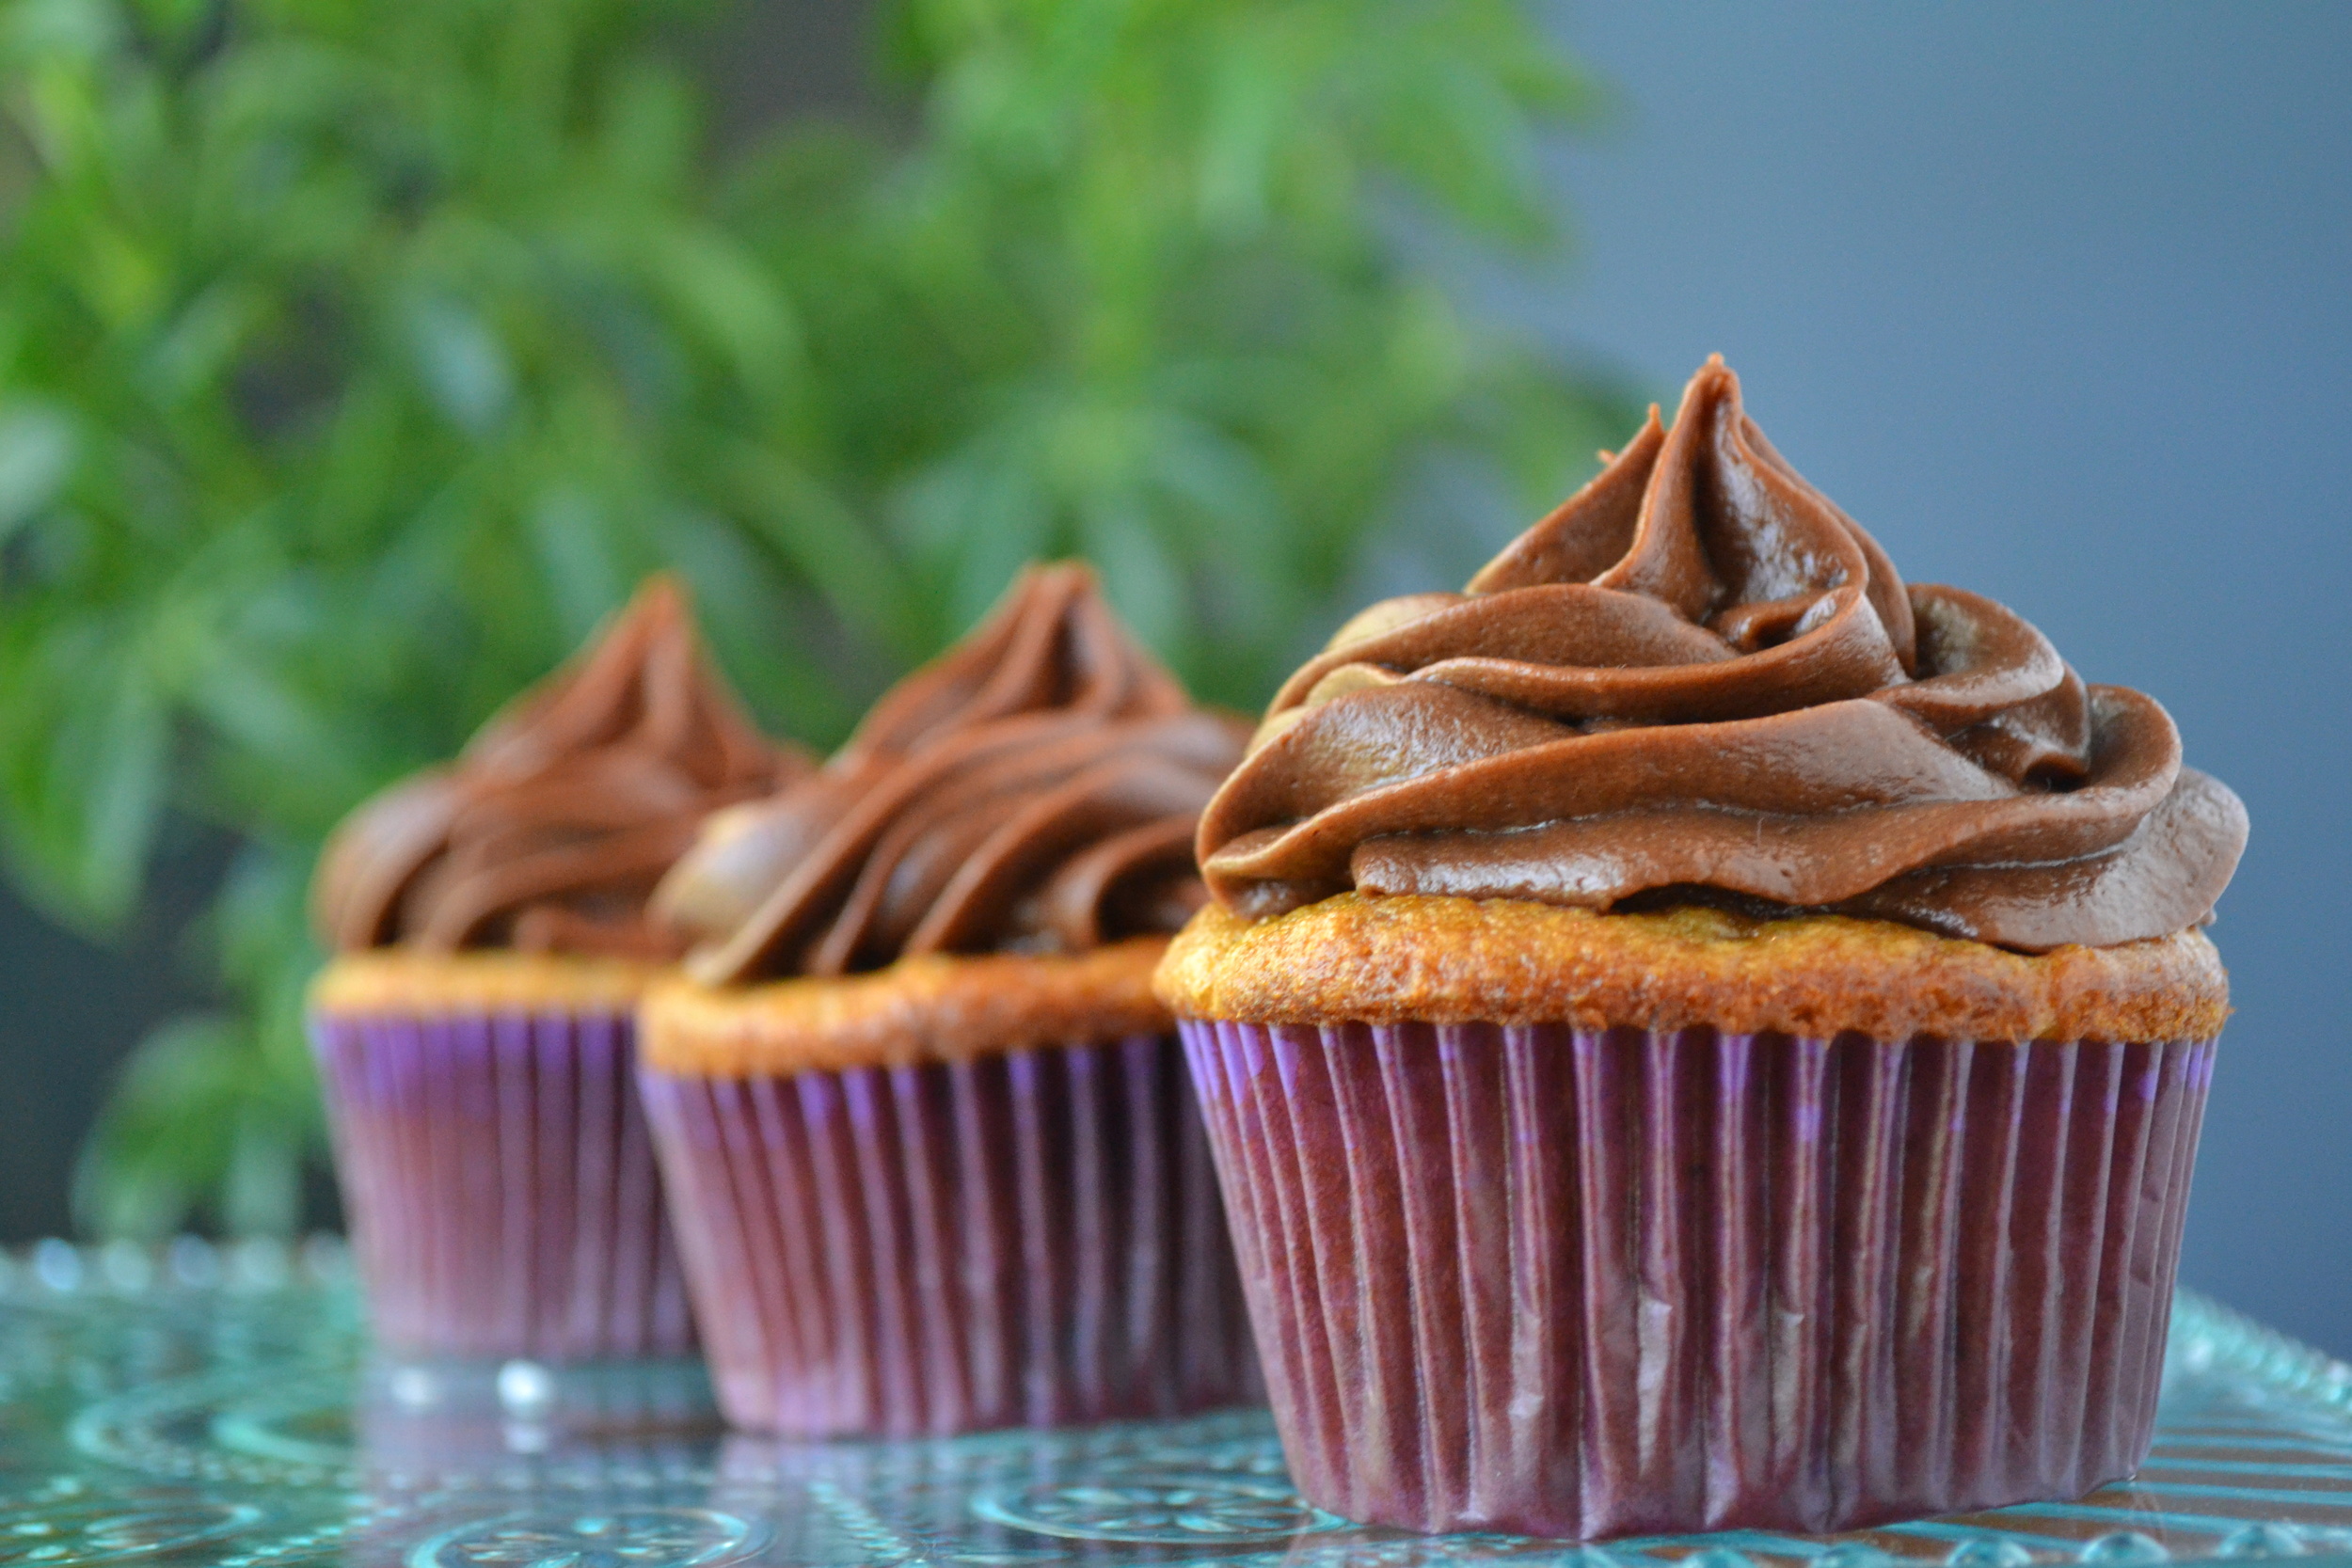 Banana Cupcakes with Chocolate Cream Cheese Frosting